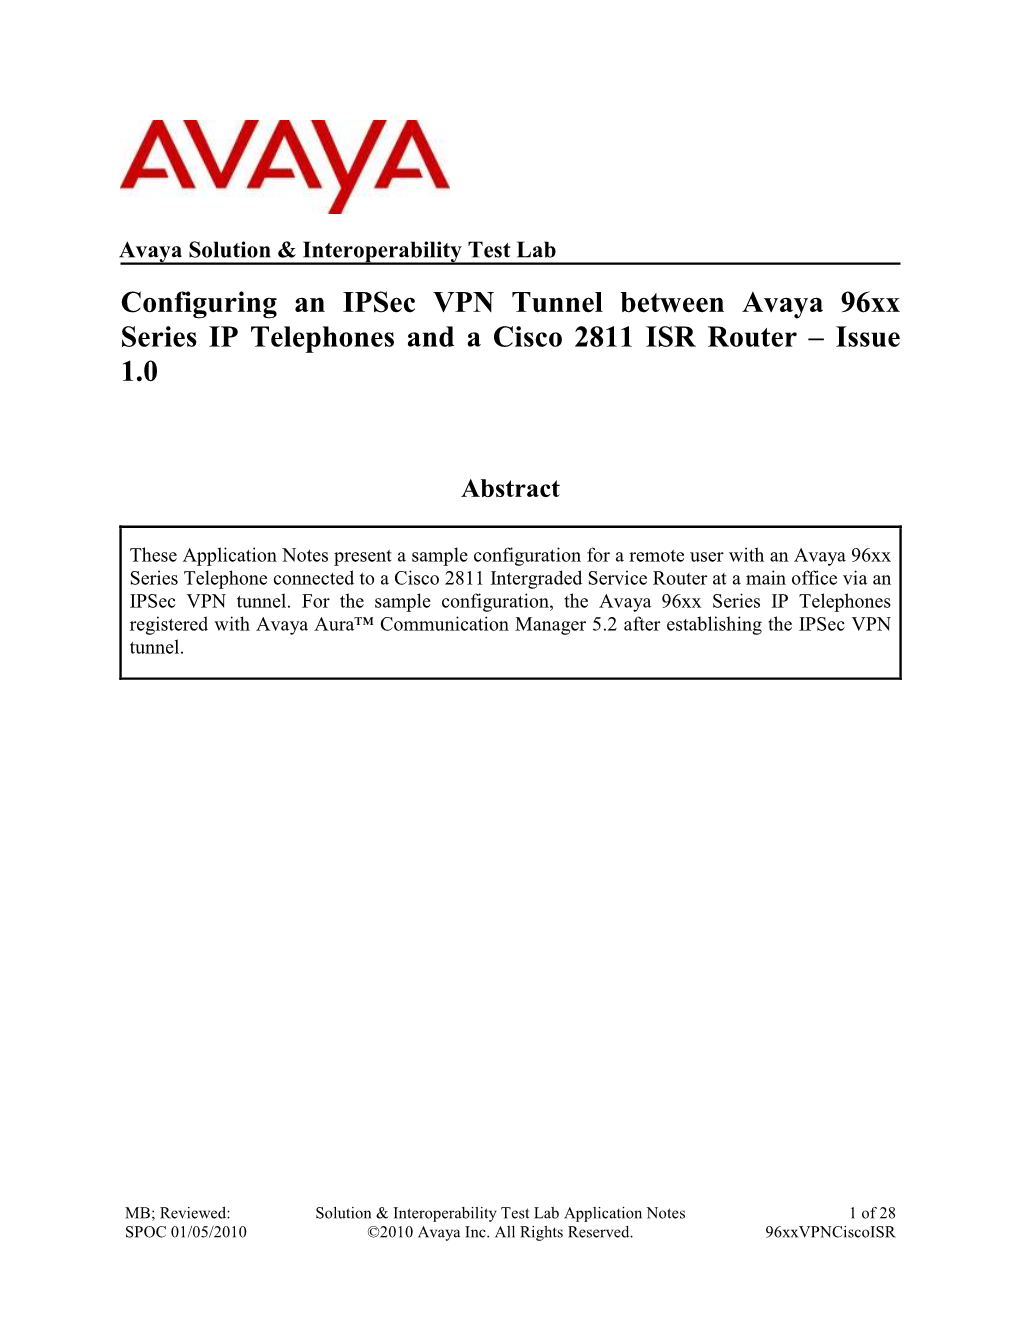 Configuring an Ipsec VPN Tunnel Between Avaya 96Xx Series IP Telephones and a Cisco 2811 ISR Router – Issue 1.0